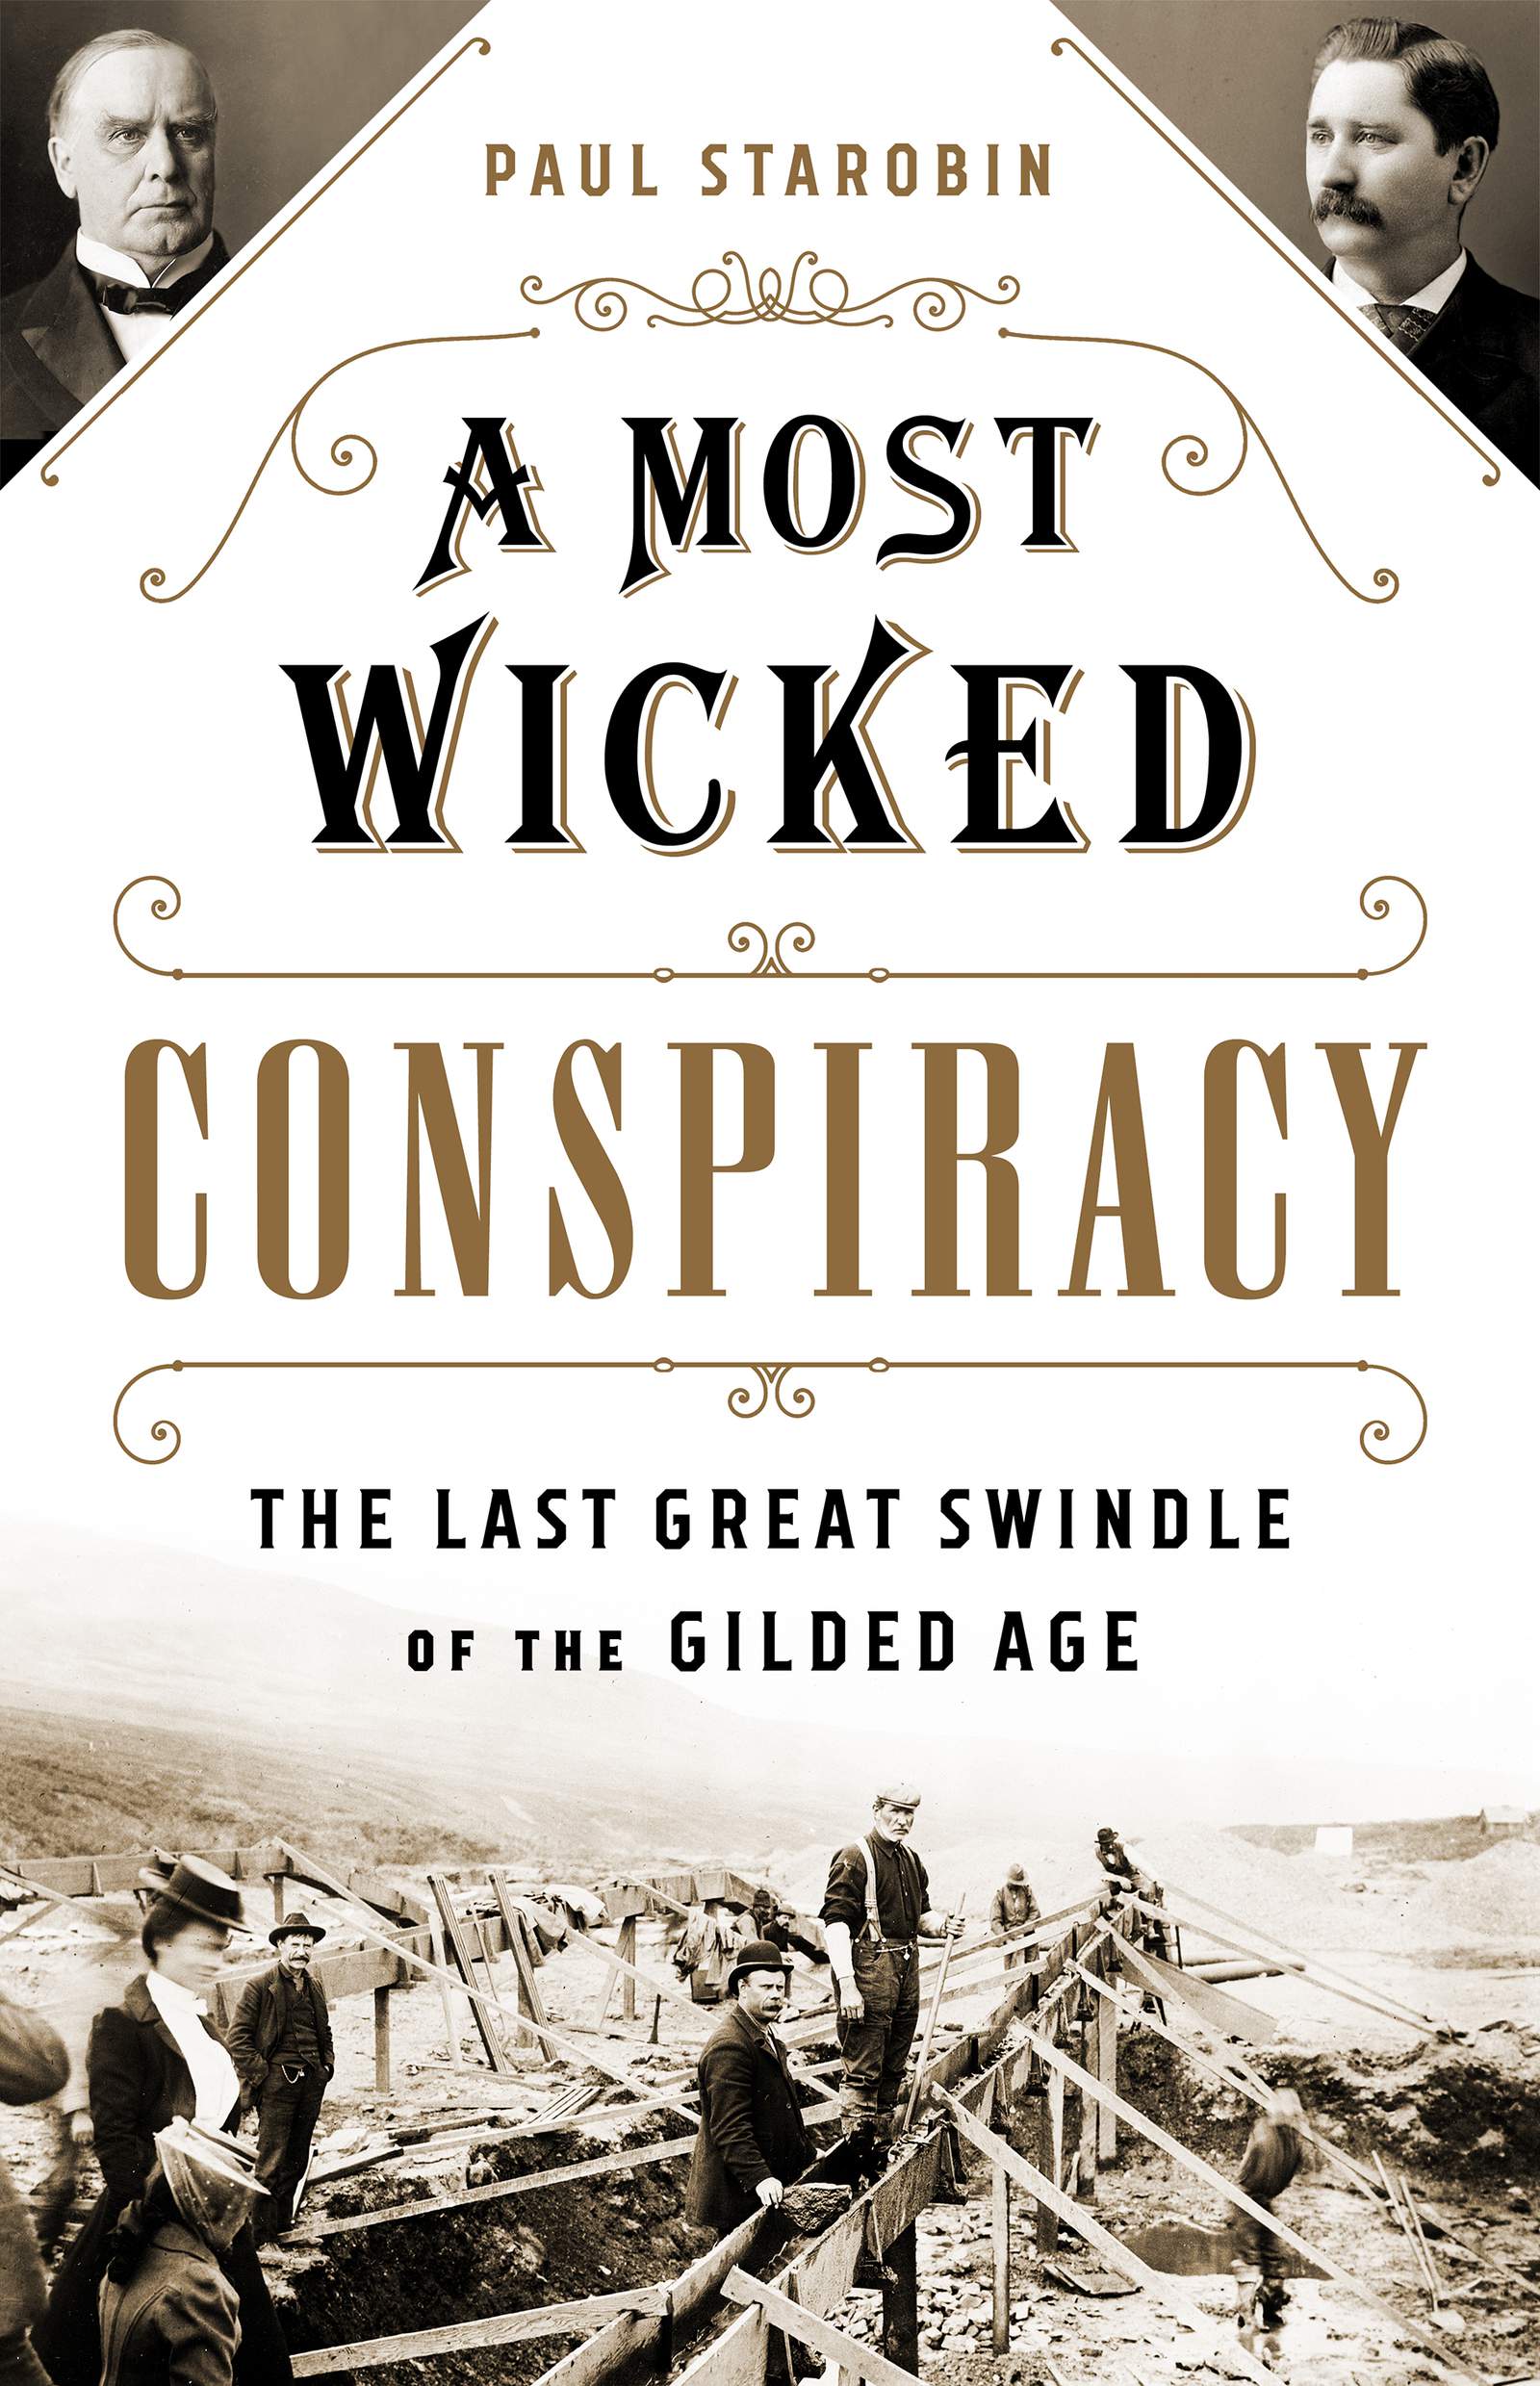 Review: 'Conspiracy' tells of gold rush and Gilded Age greed